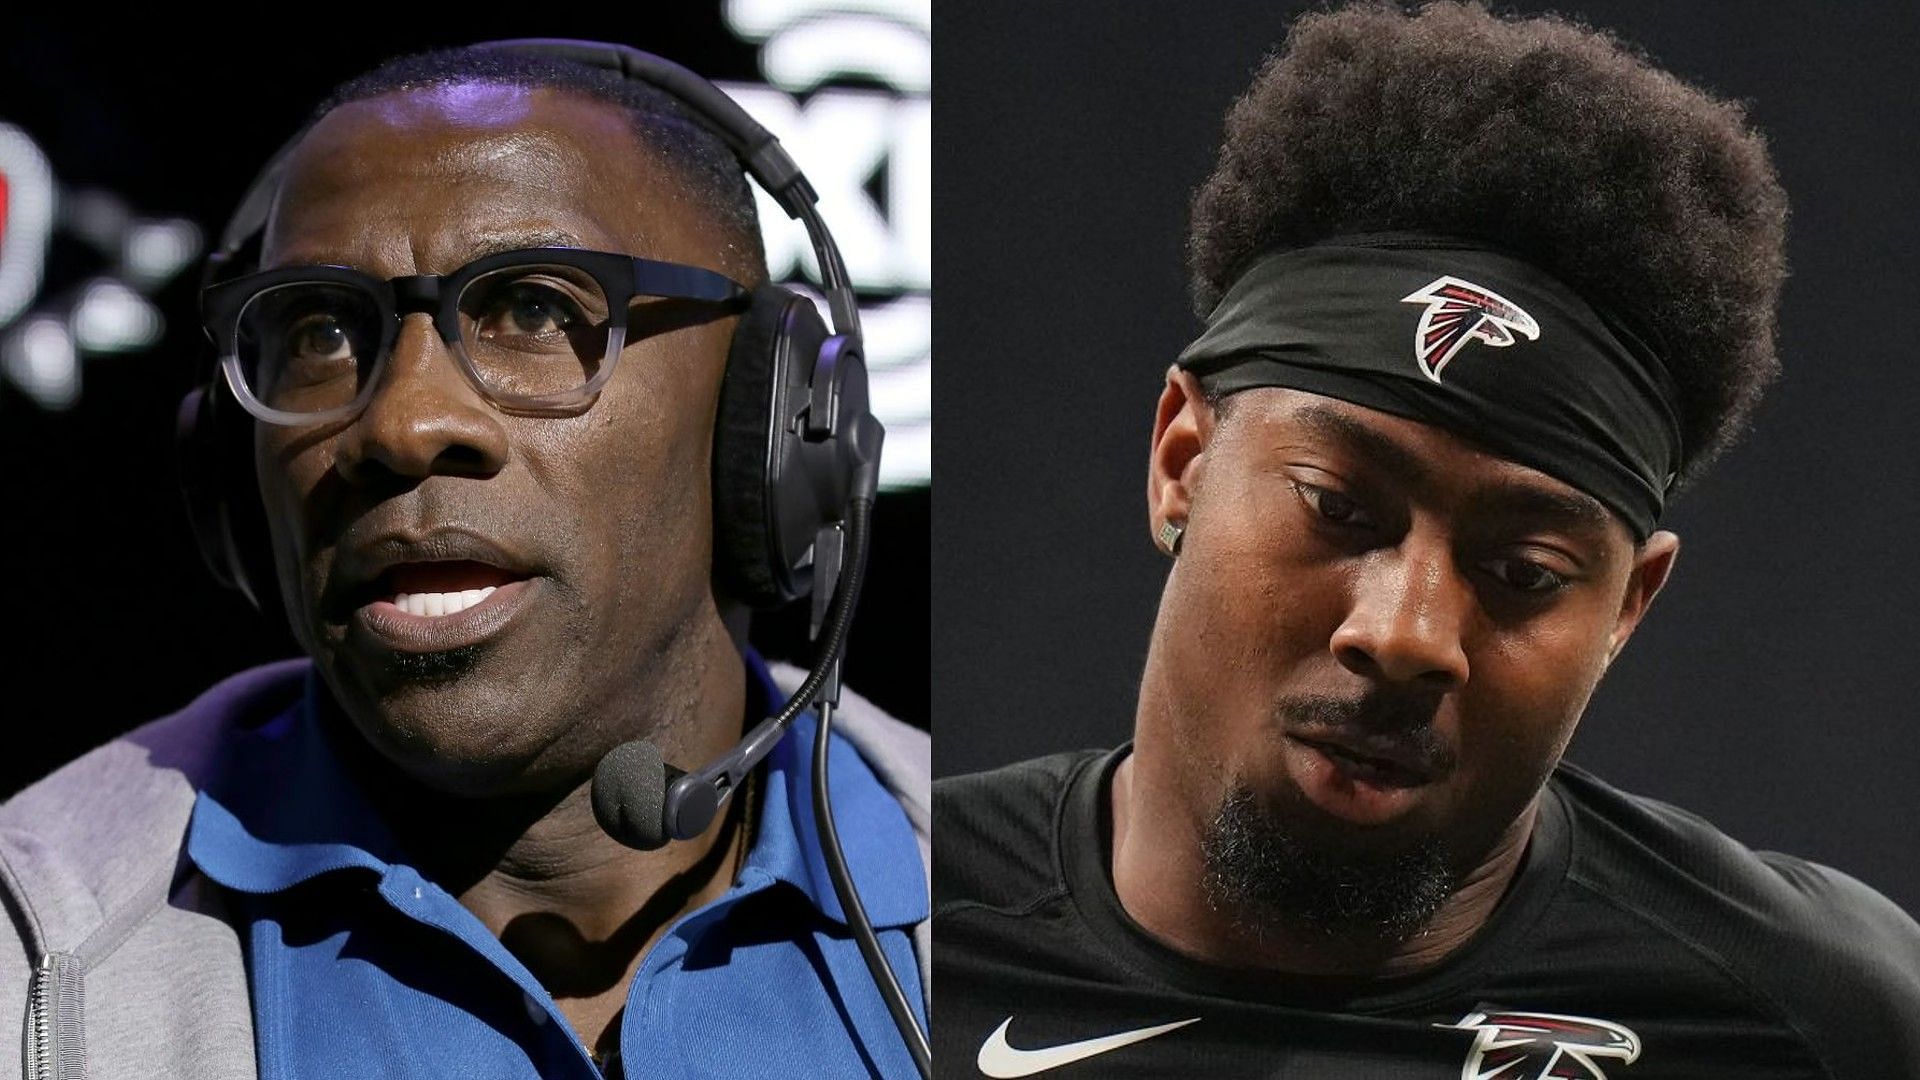 "Dumb" Shannon Sharpe slams suspended NFL players for engaging in